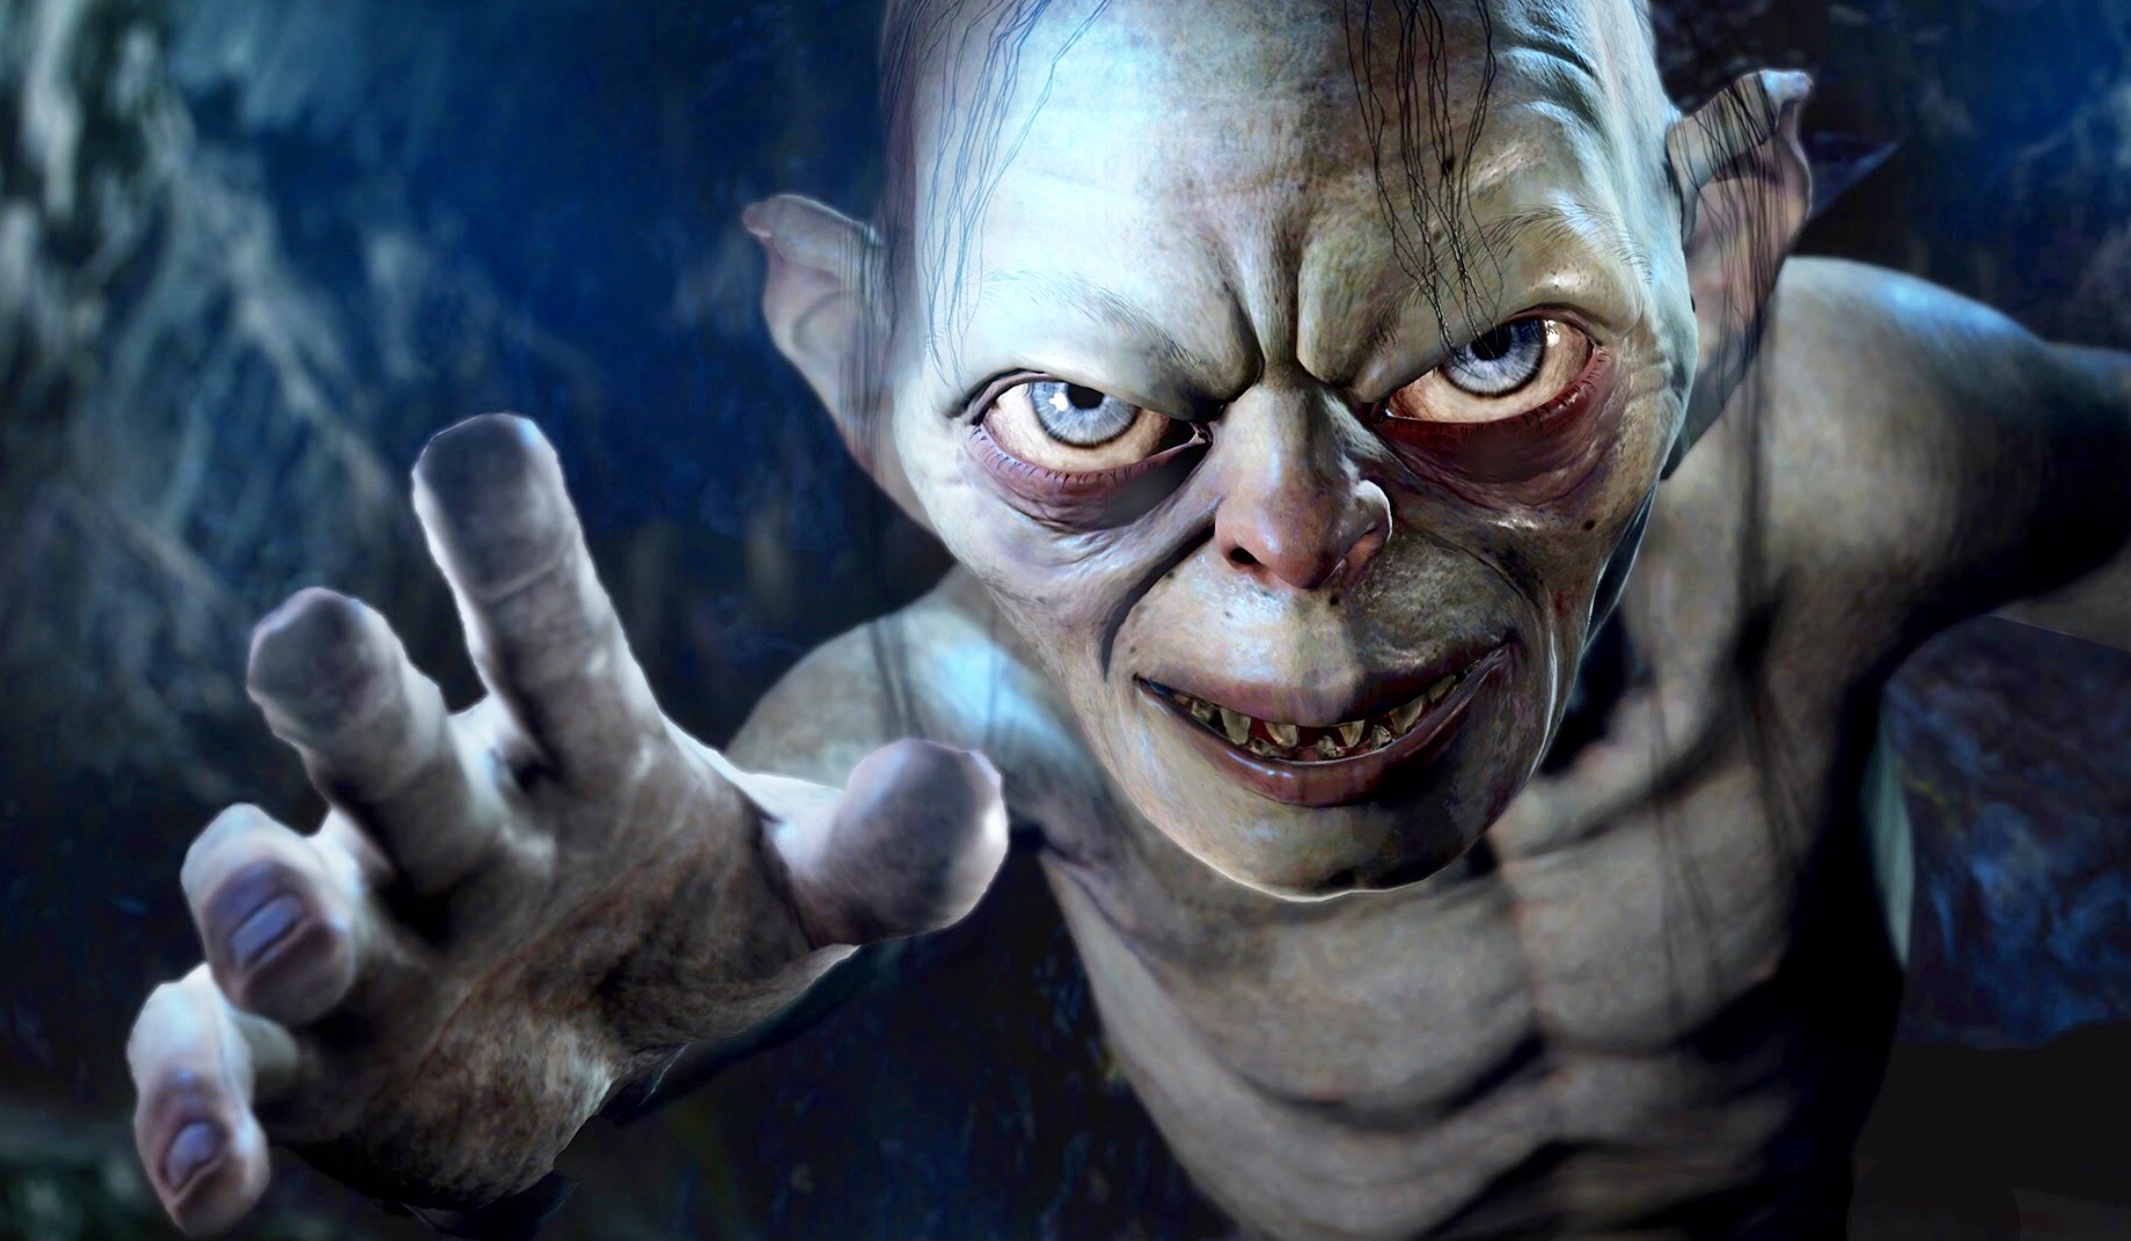 New Lord of the Rings Trailer: Gollum